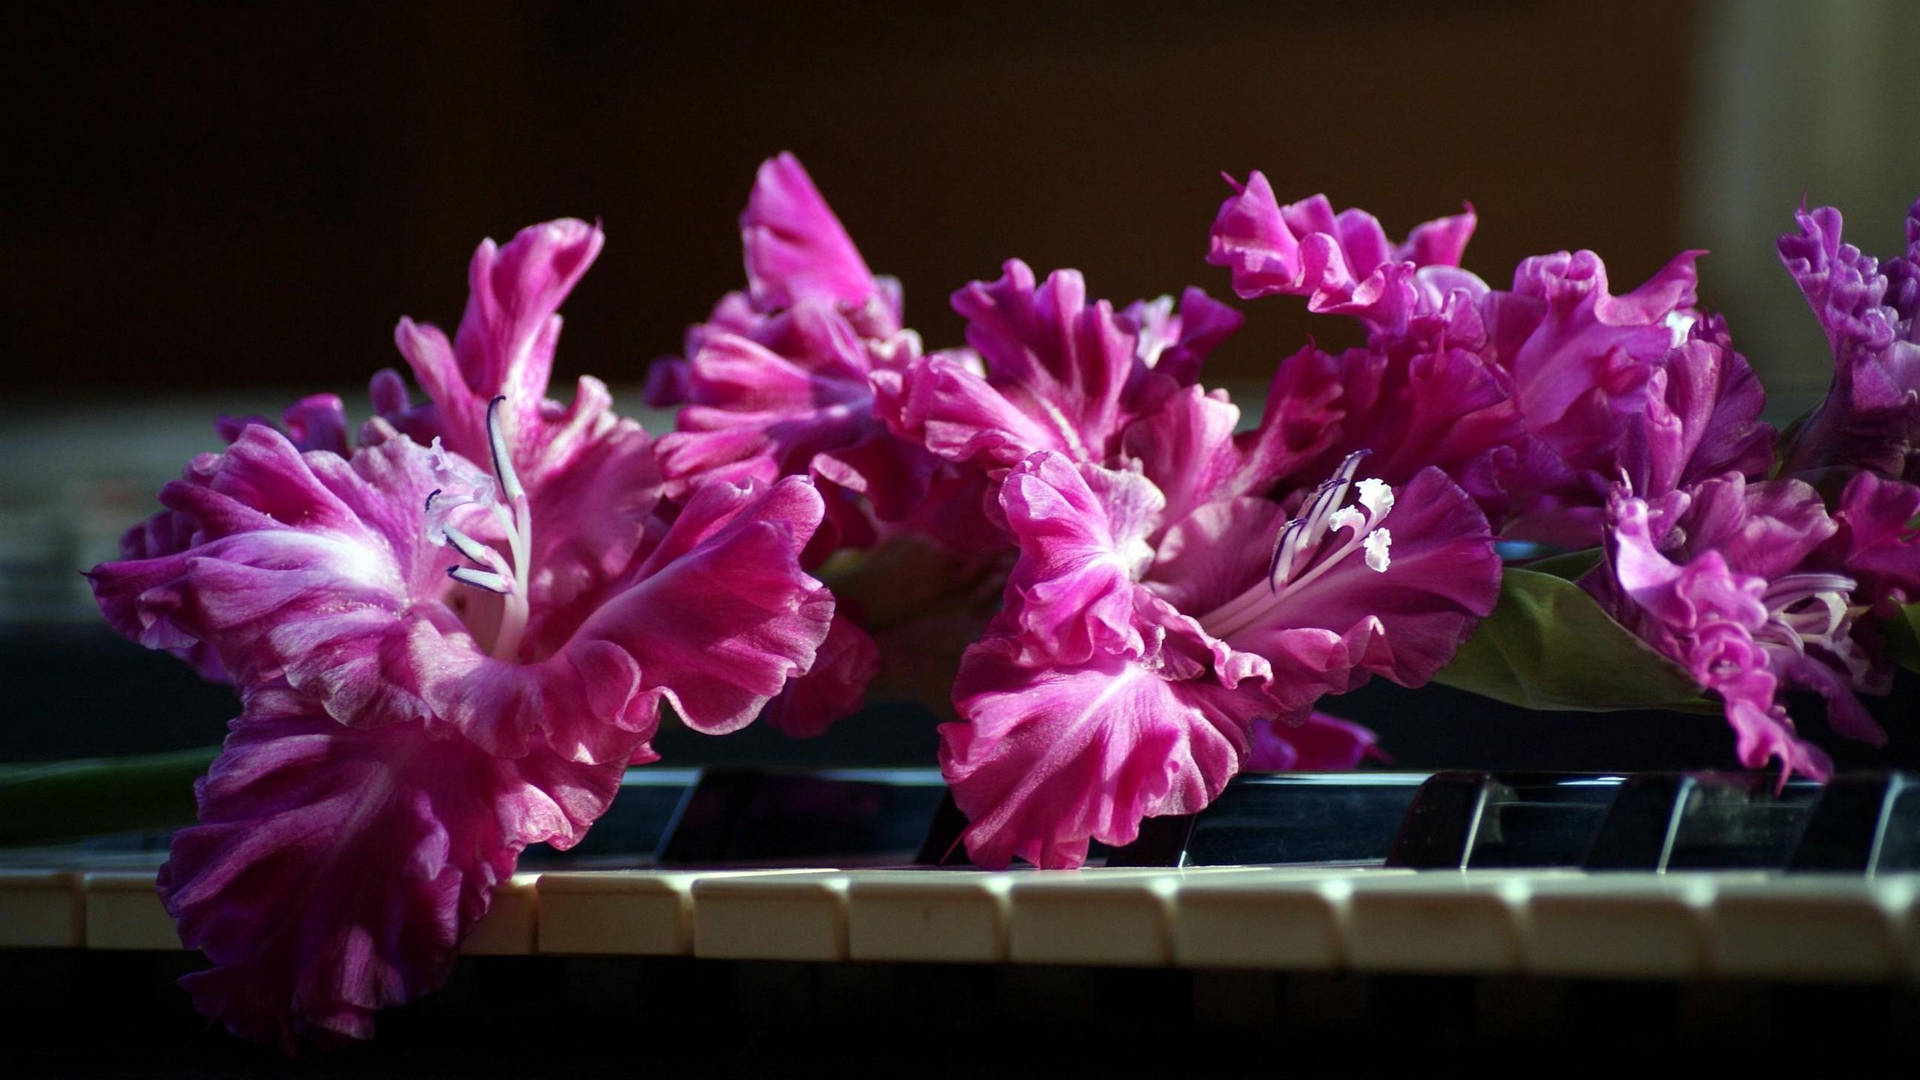 Gladiolus Flower On A Piano Background